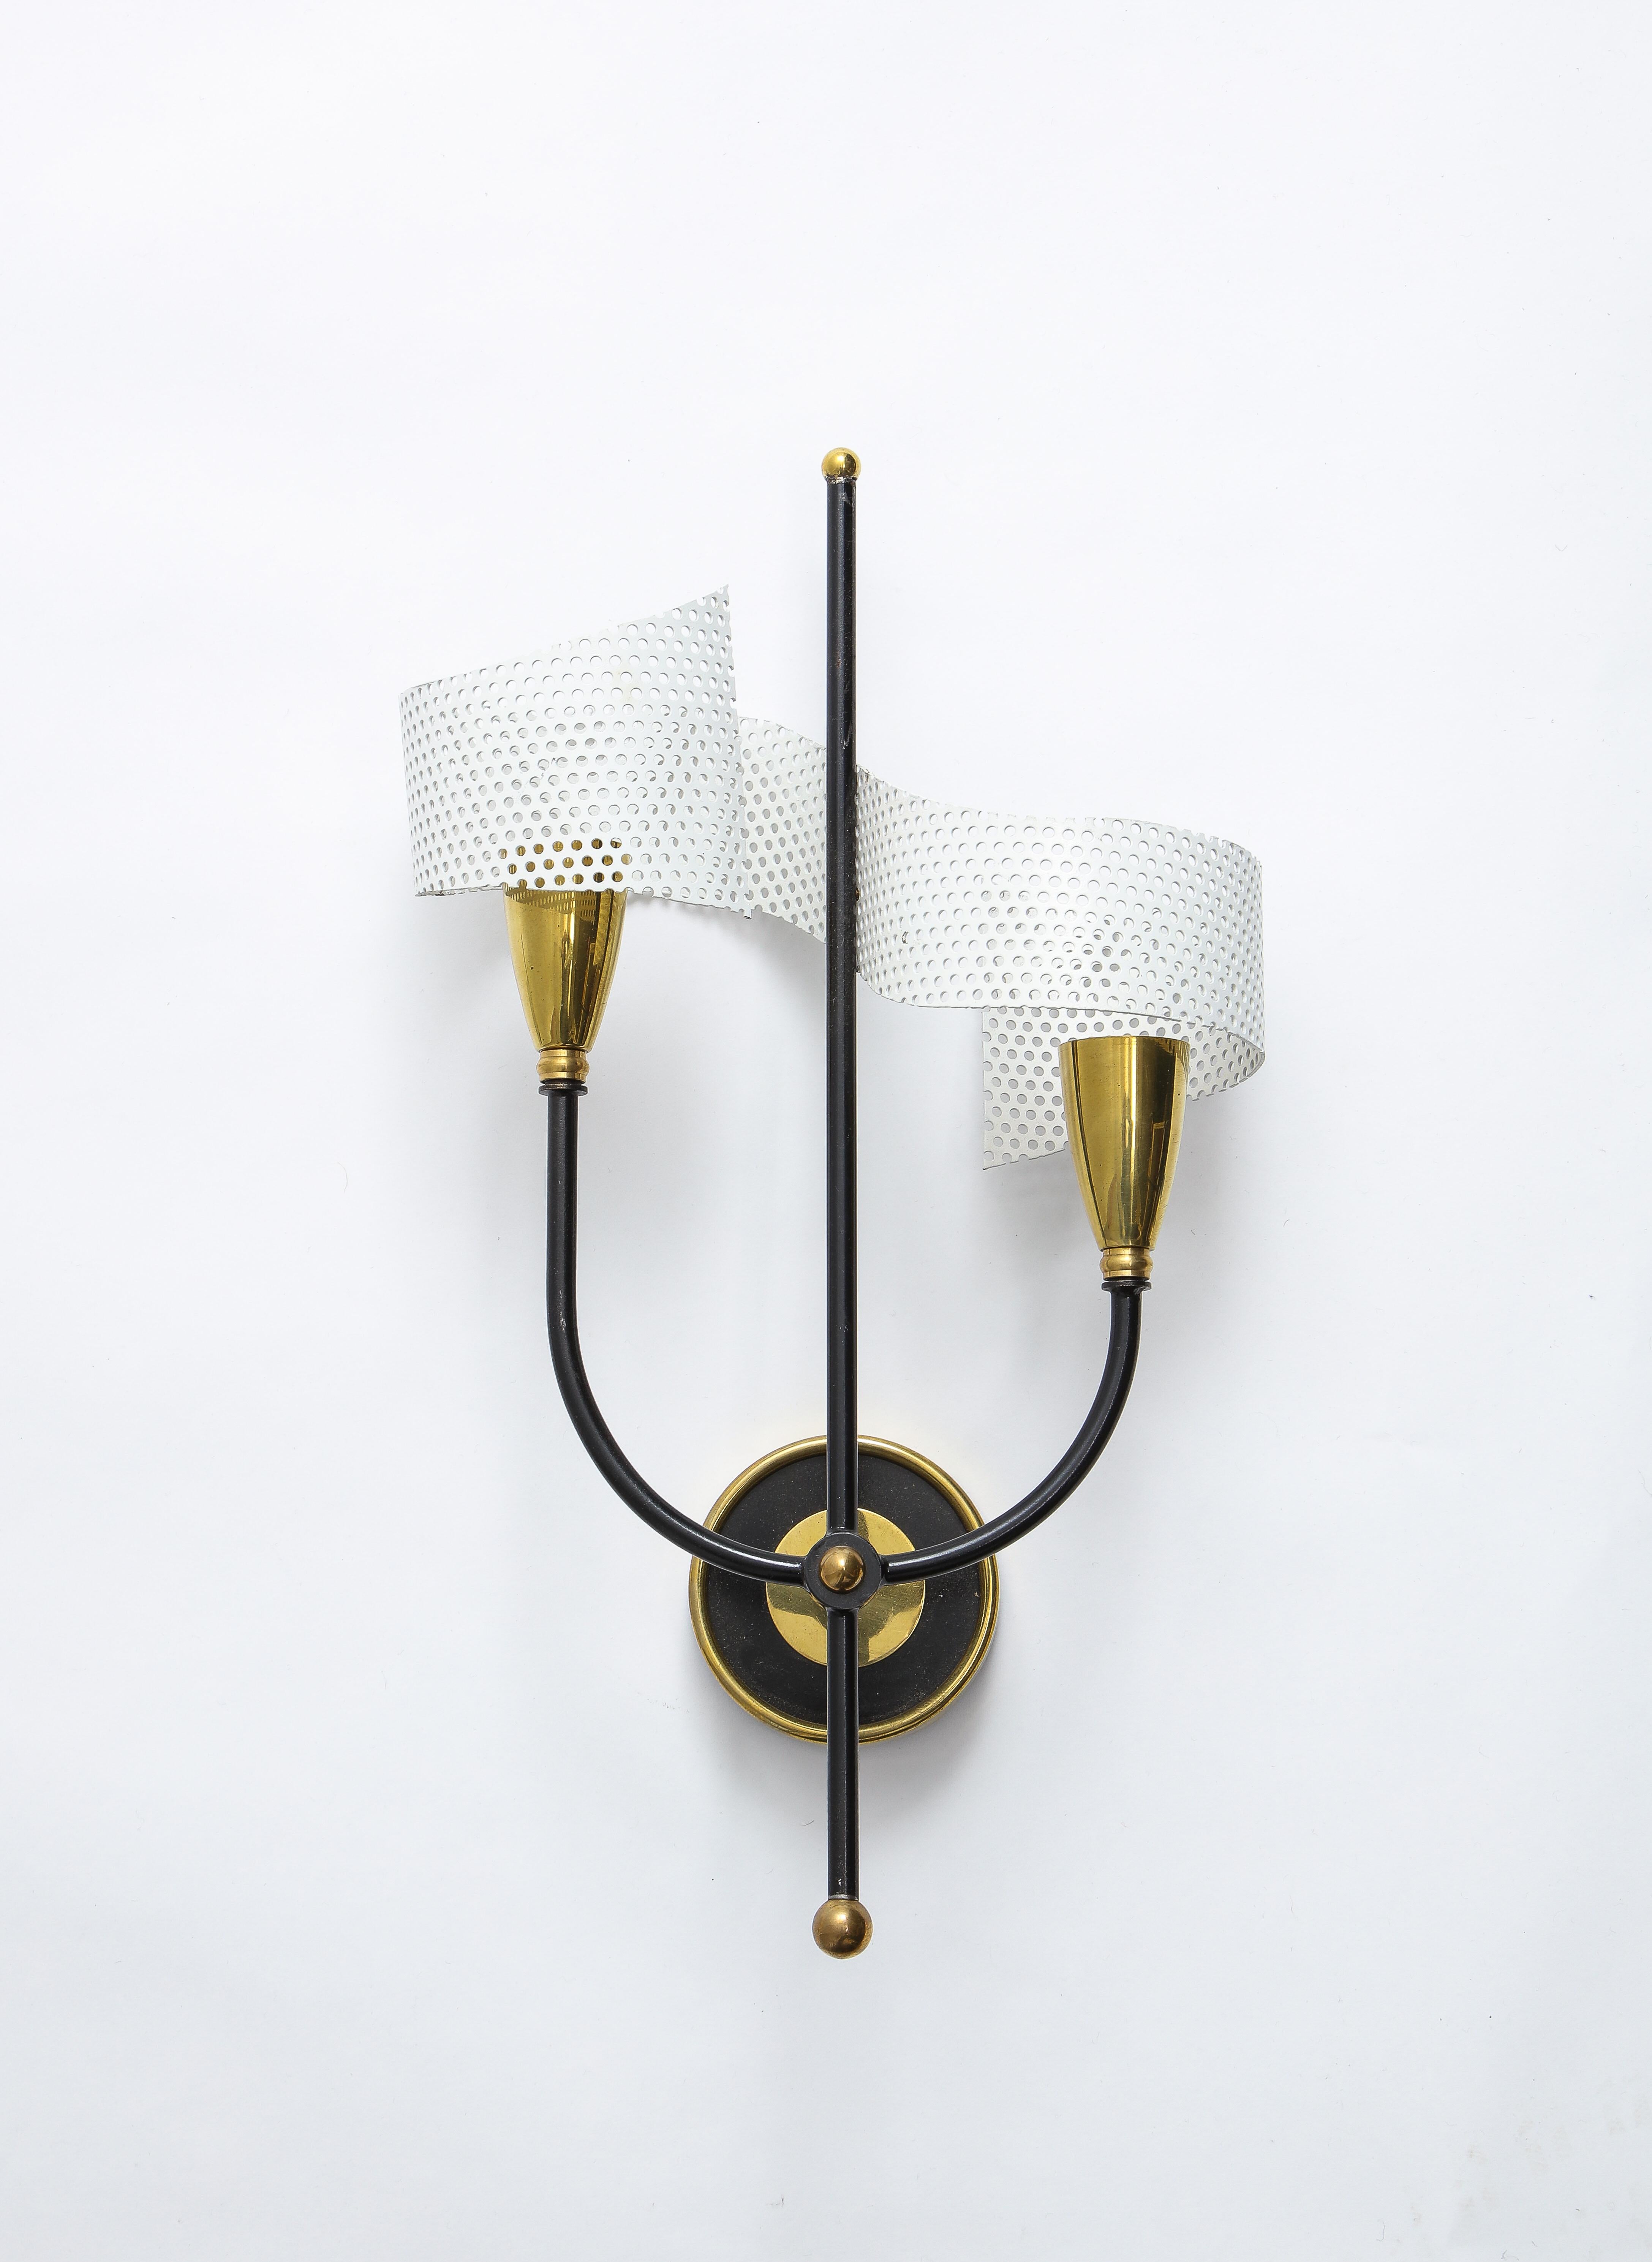 20th Century Pair of Scrolled Sconces in Brass and Aluminium by Mathieu, France, 1950s For Sale